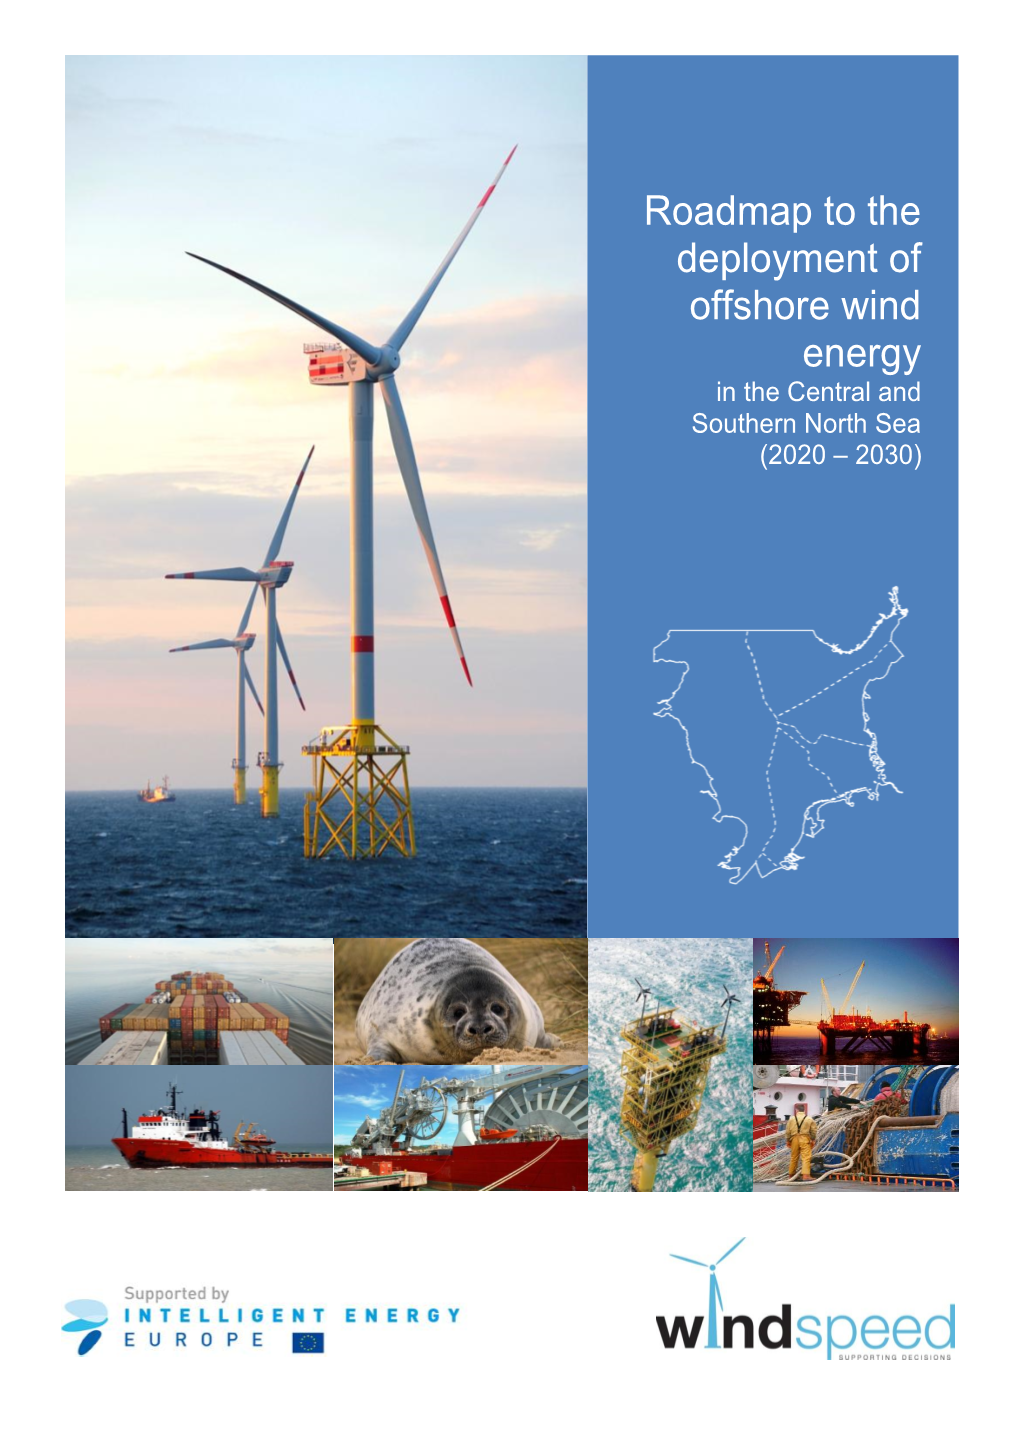 Roadmap to the Deployment of Offshore Wind Energy in the Central and Southern North Sea (2020 - 2030)